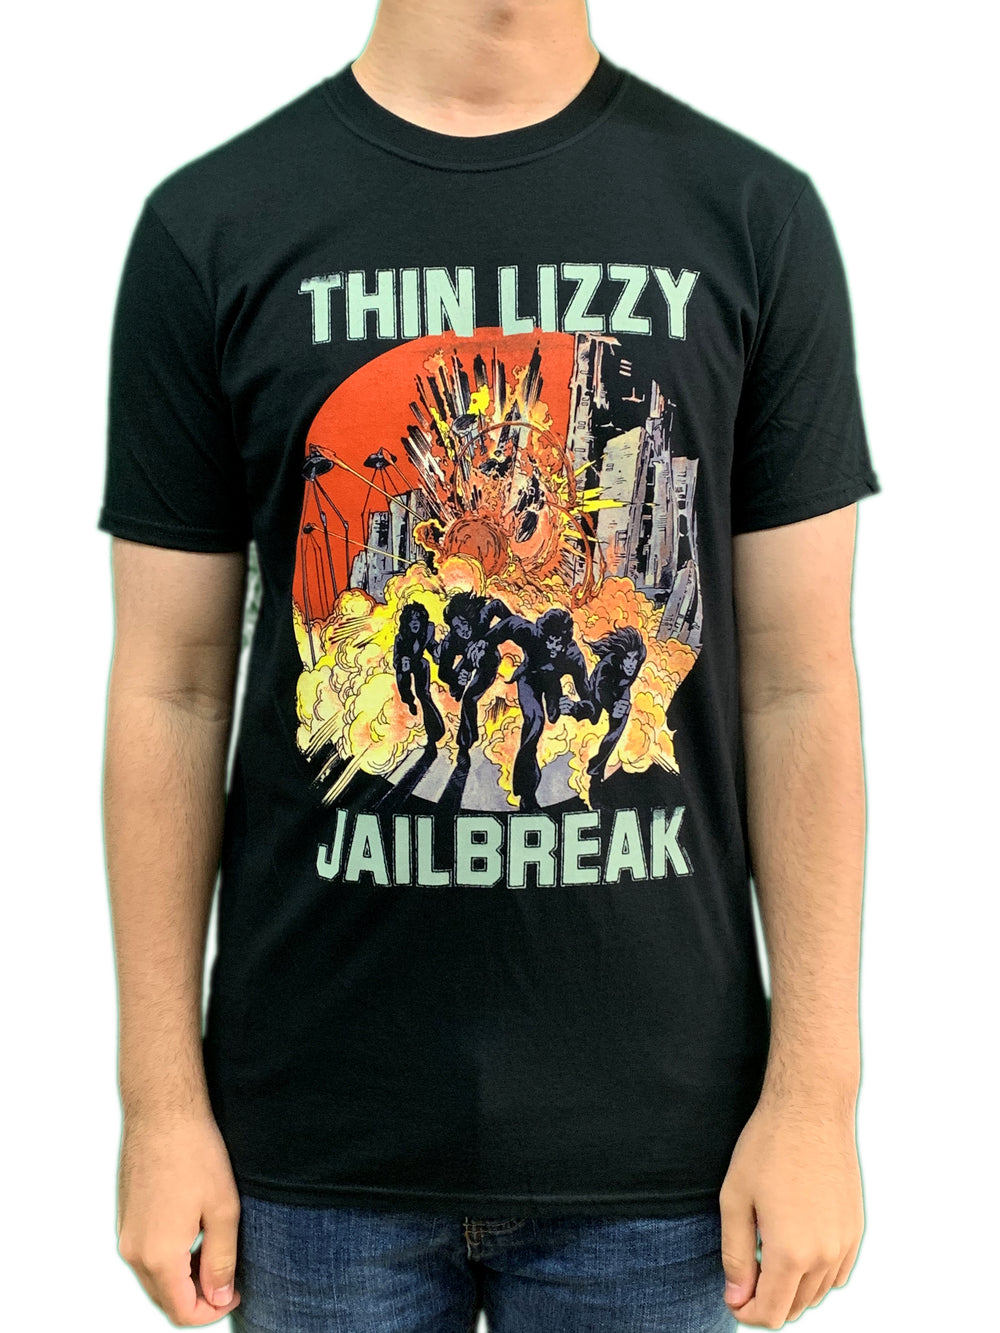 Thin Lizzy Jailbreak Explosion Unisex Official Tee Shirt Brand New Various Sizes